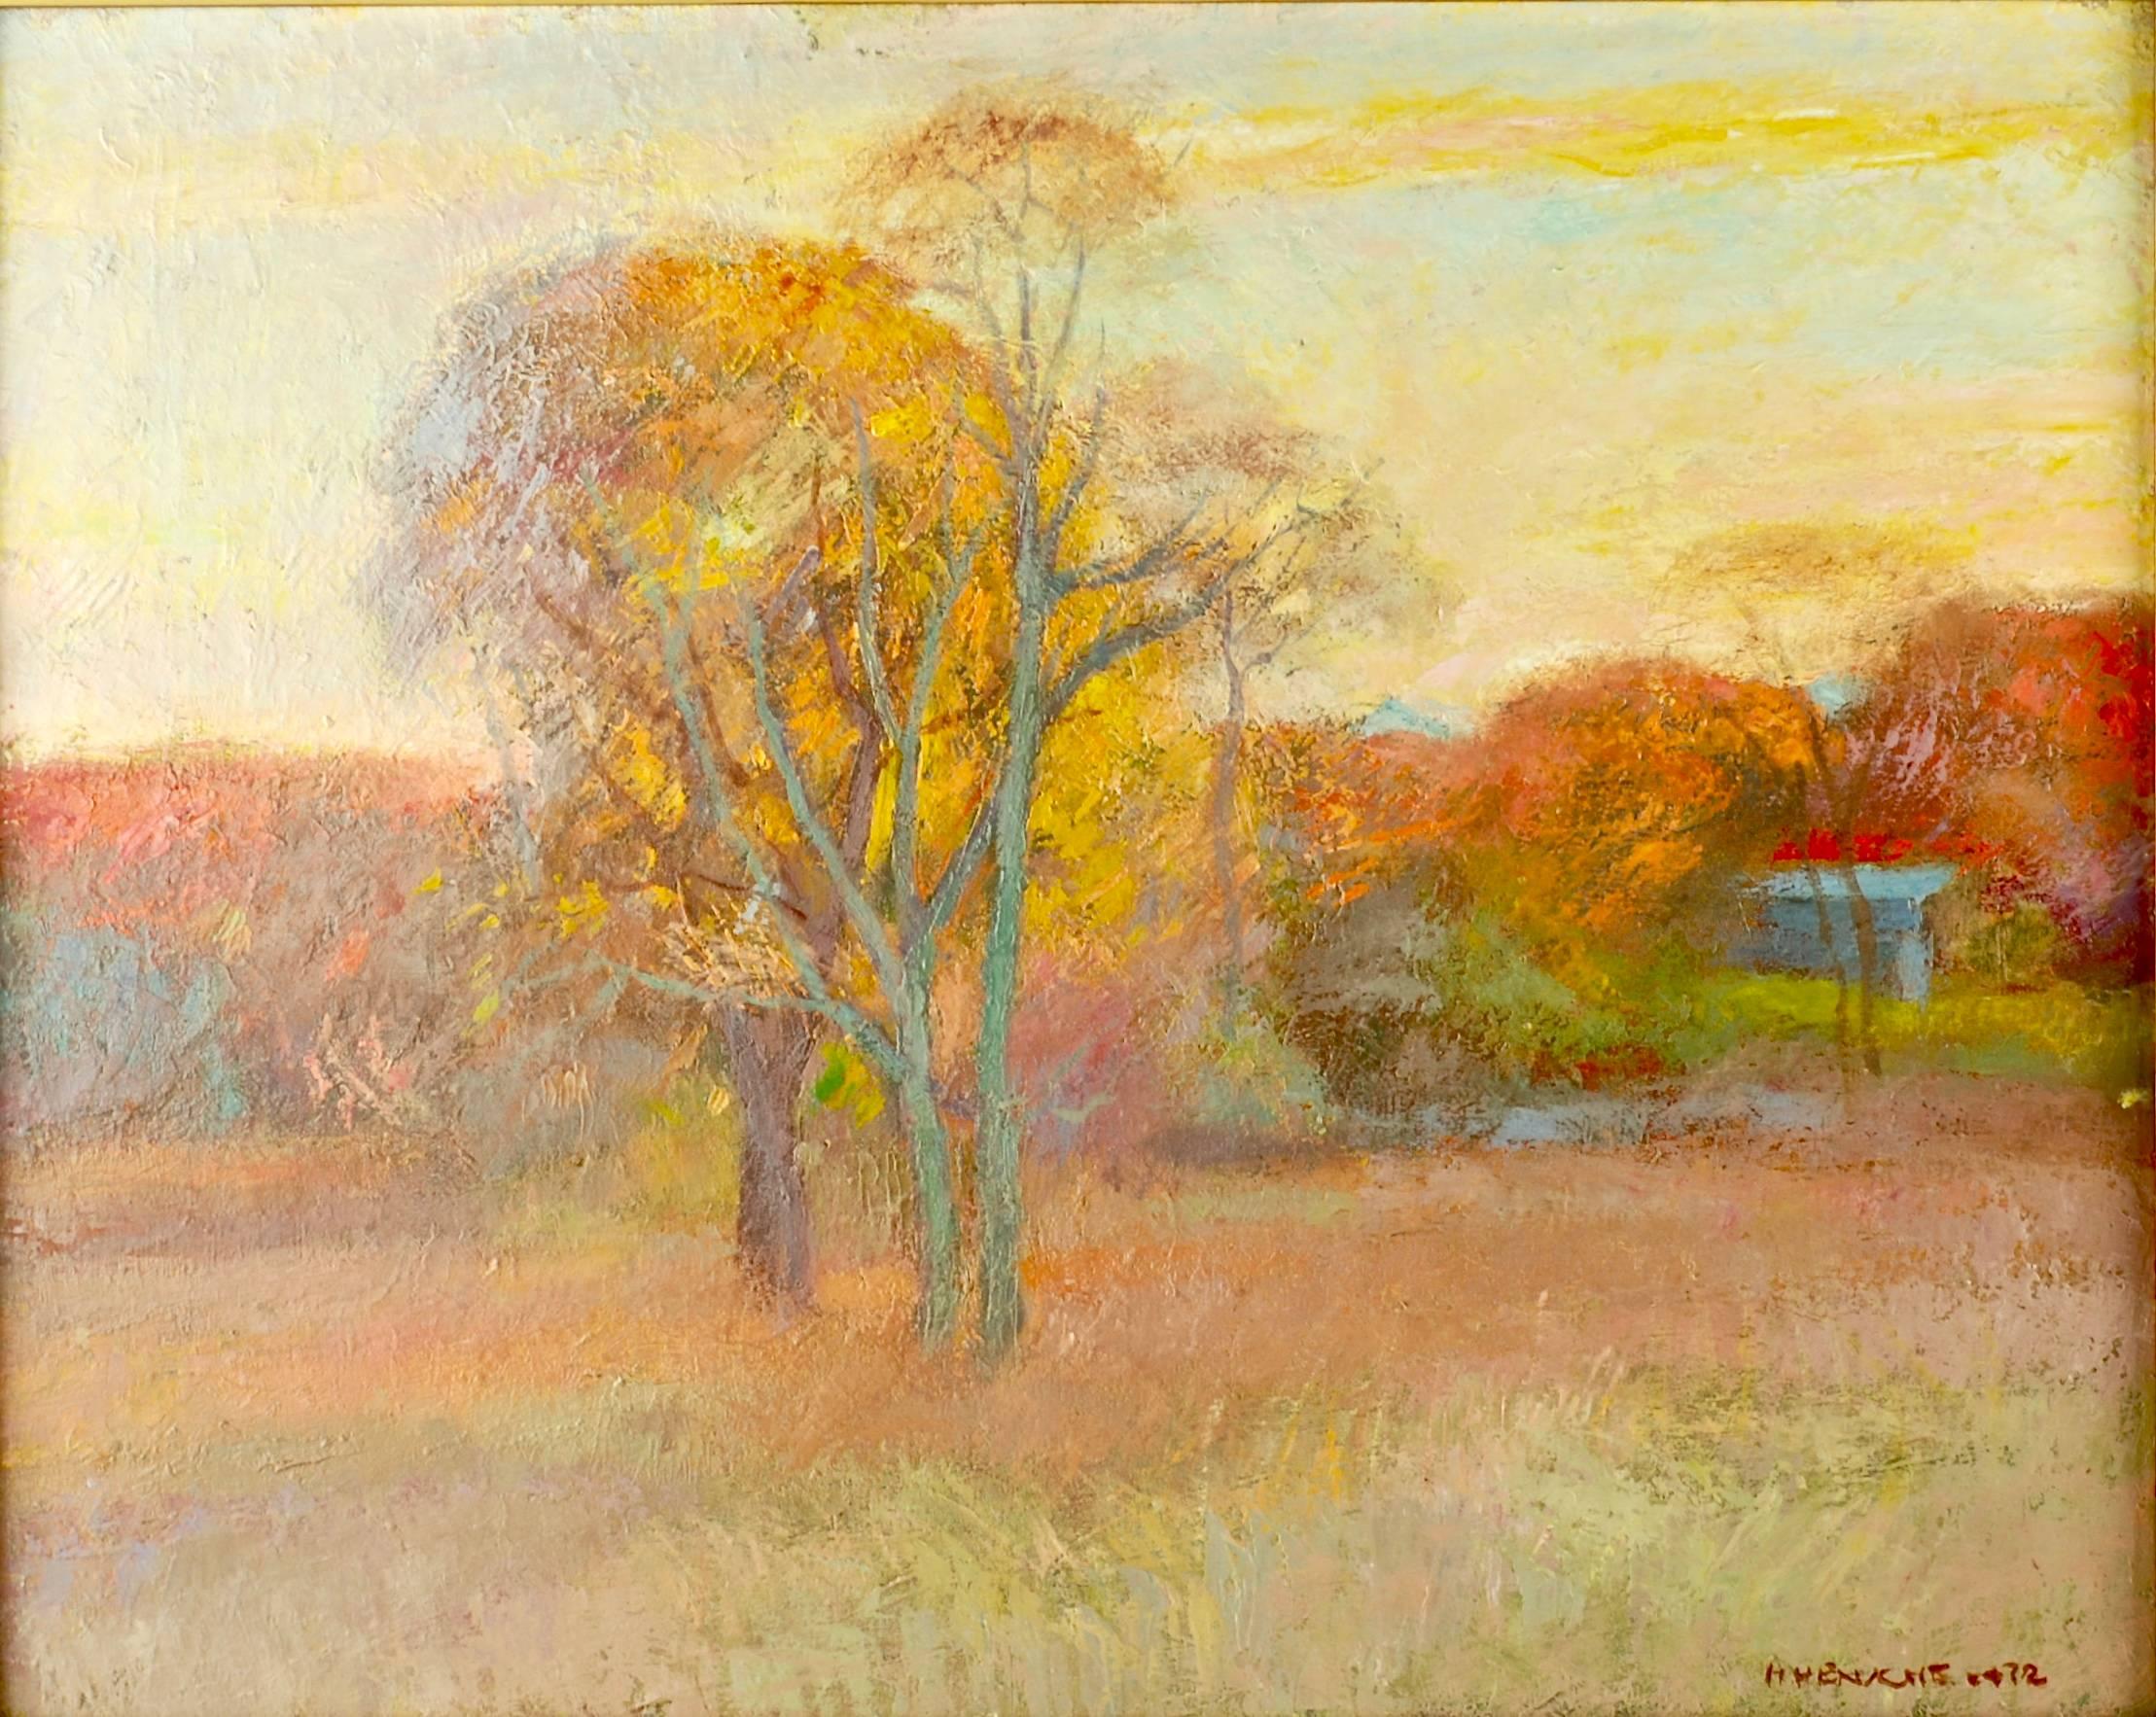 This striking Impressionist painting was executed by well listed artist Henry Hensche (1899 - 1992). A gifted painter widely recognized as an unparalleled colorist, Hensche began his studies at the Art Institute of Chicago and moved to the famed